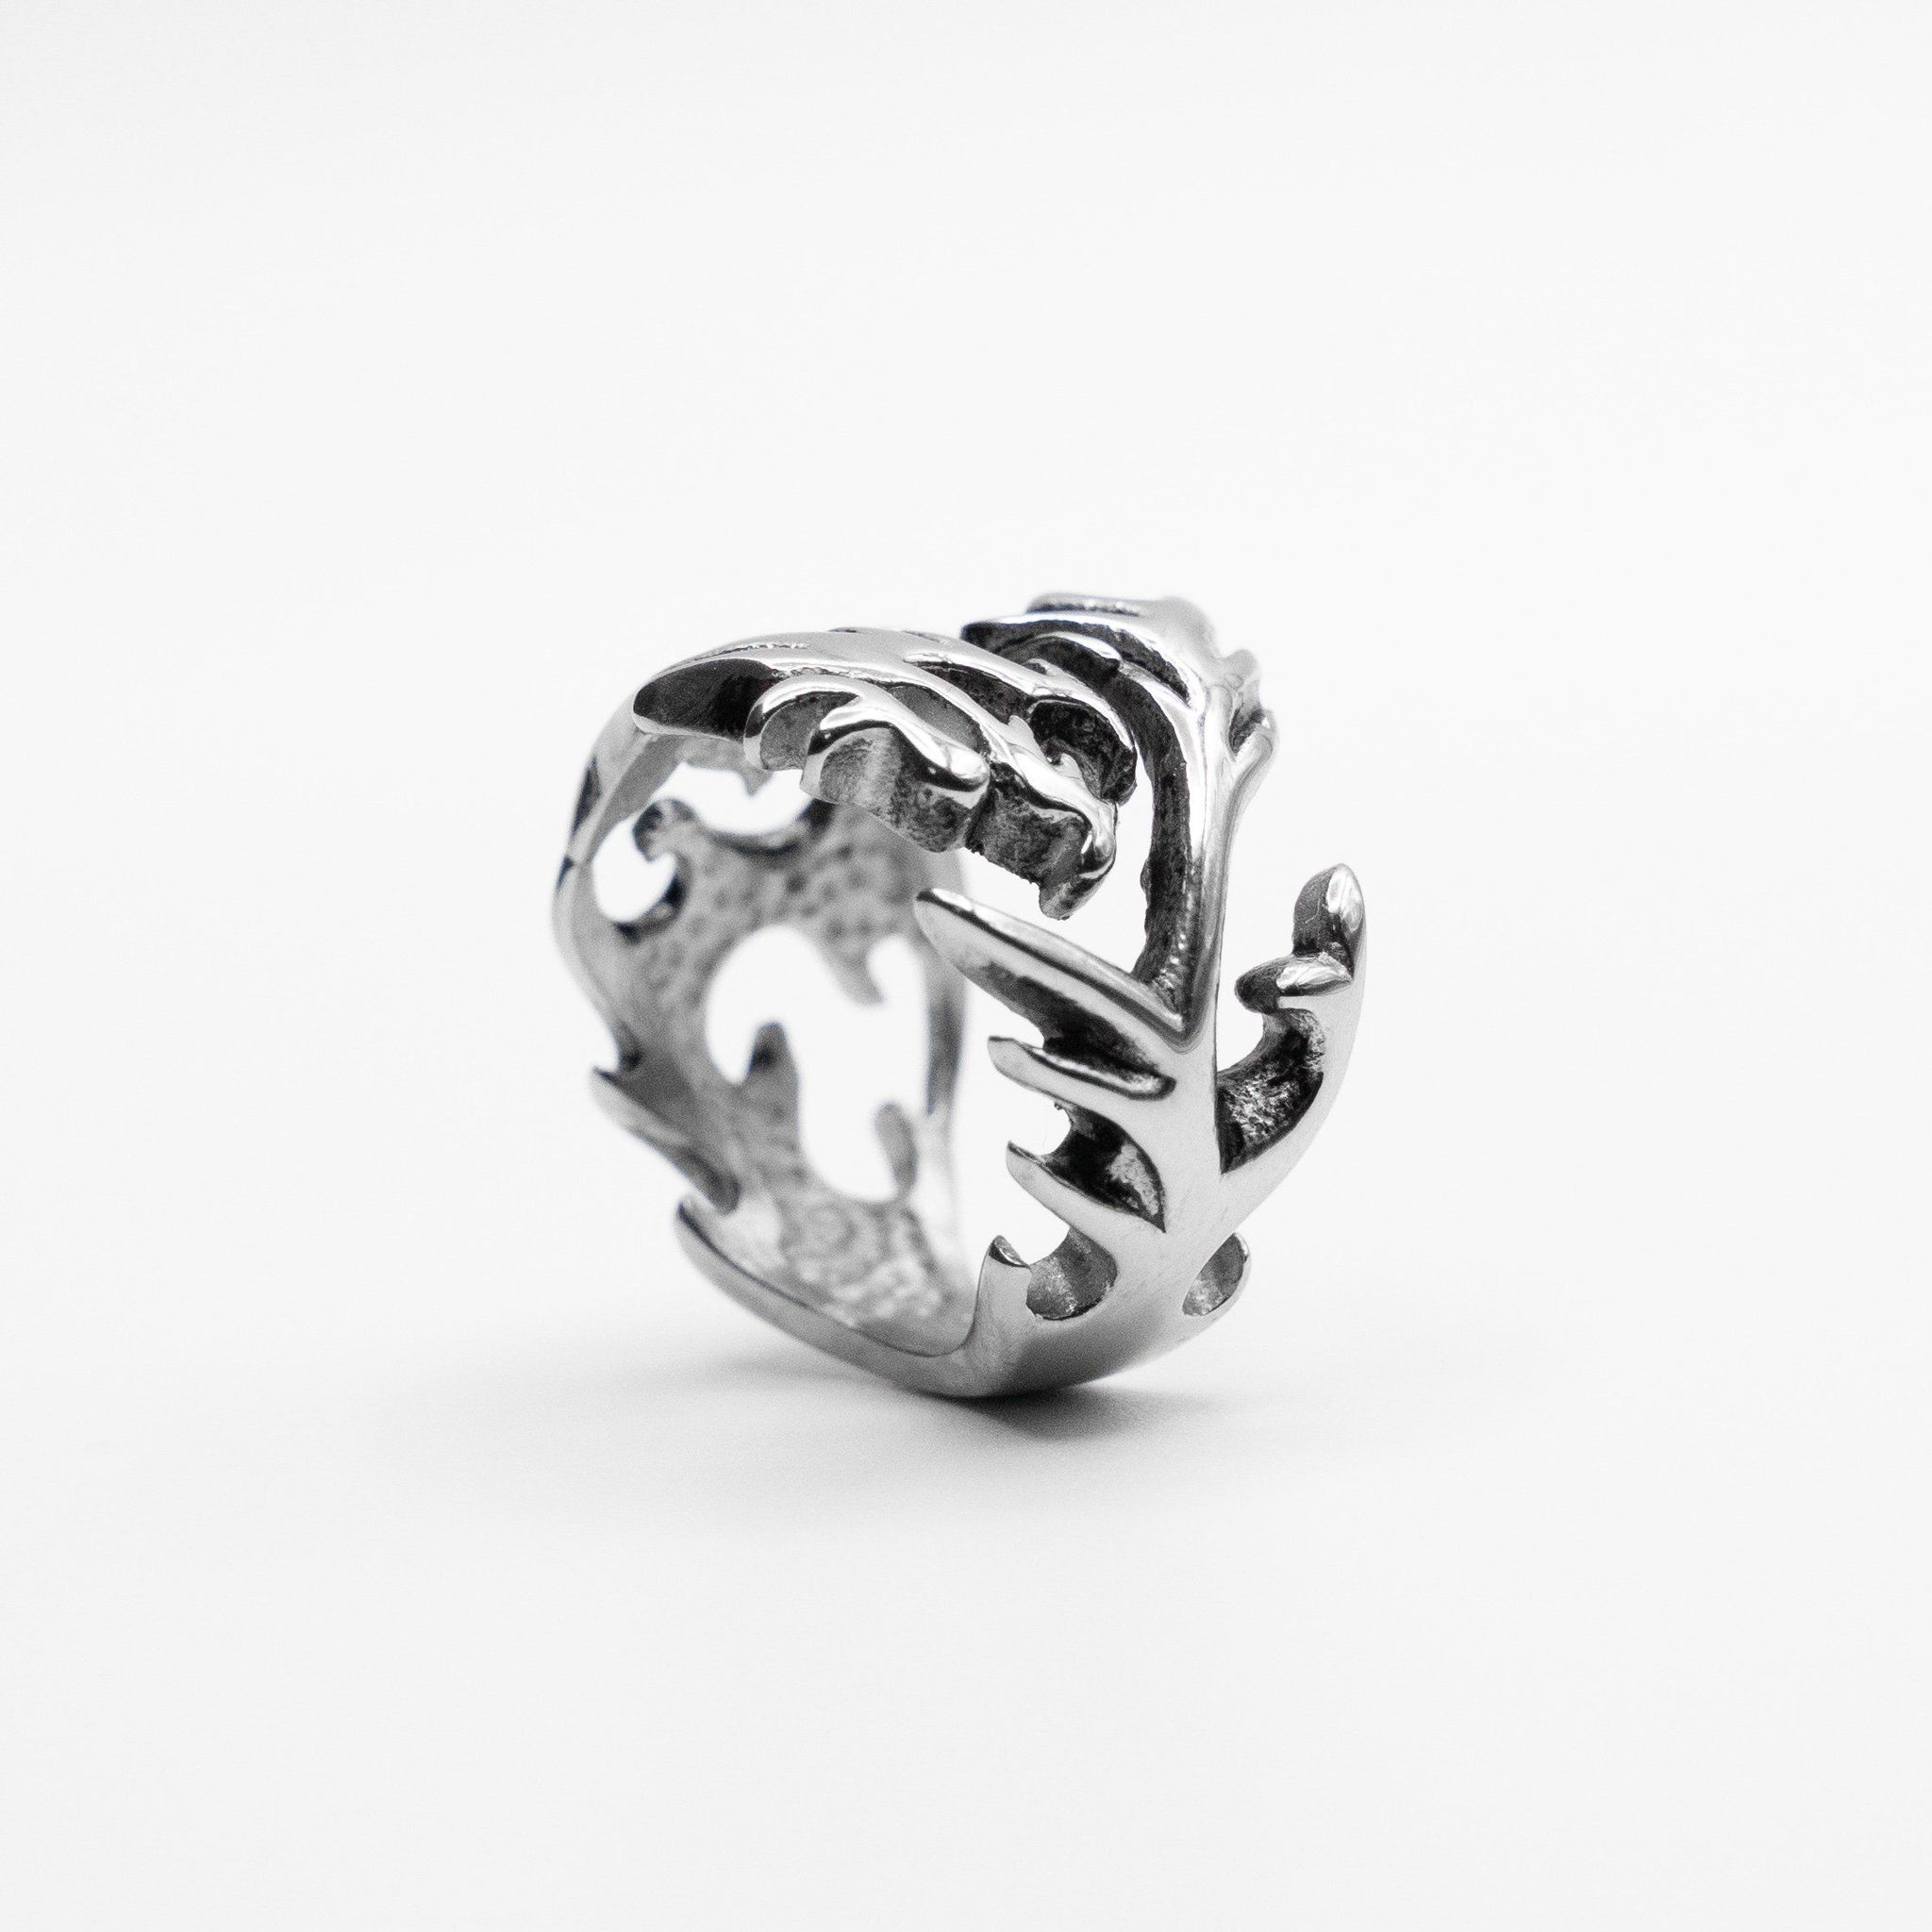 Bottom view of The Tormented Dragon Ring in Stainless Steel, revealing a unique perspective on its intricate design and craftsmanship. 